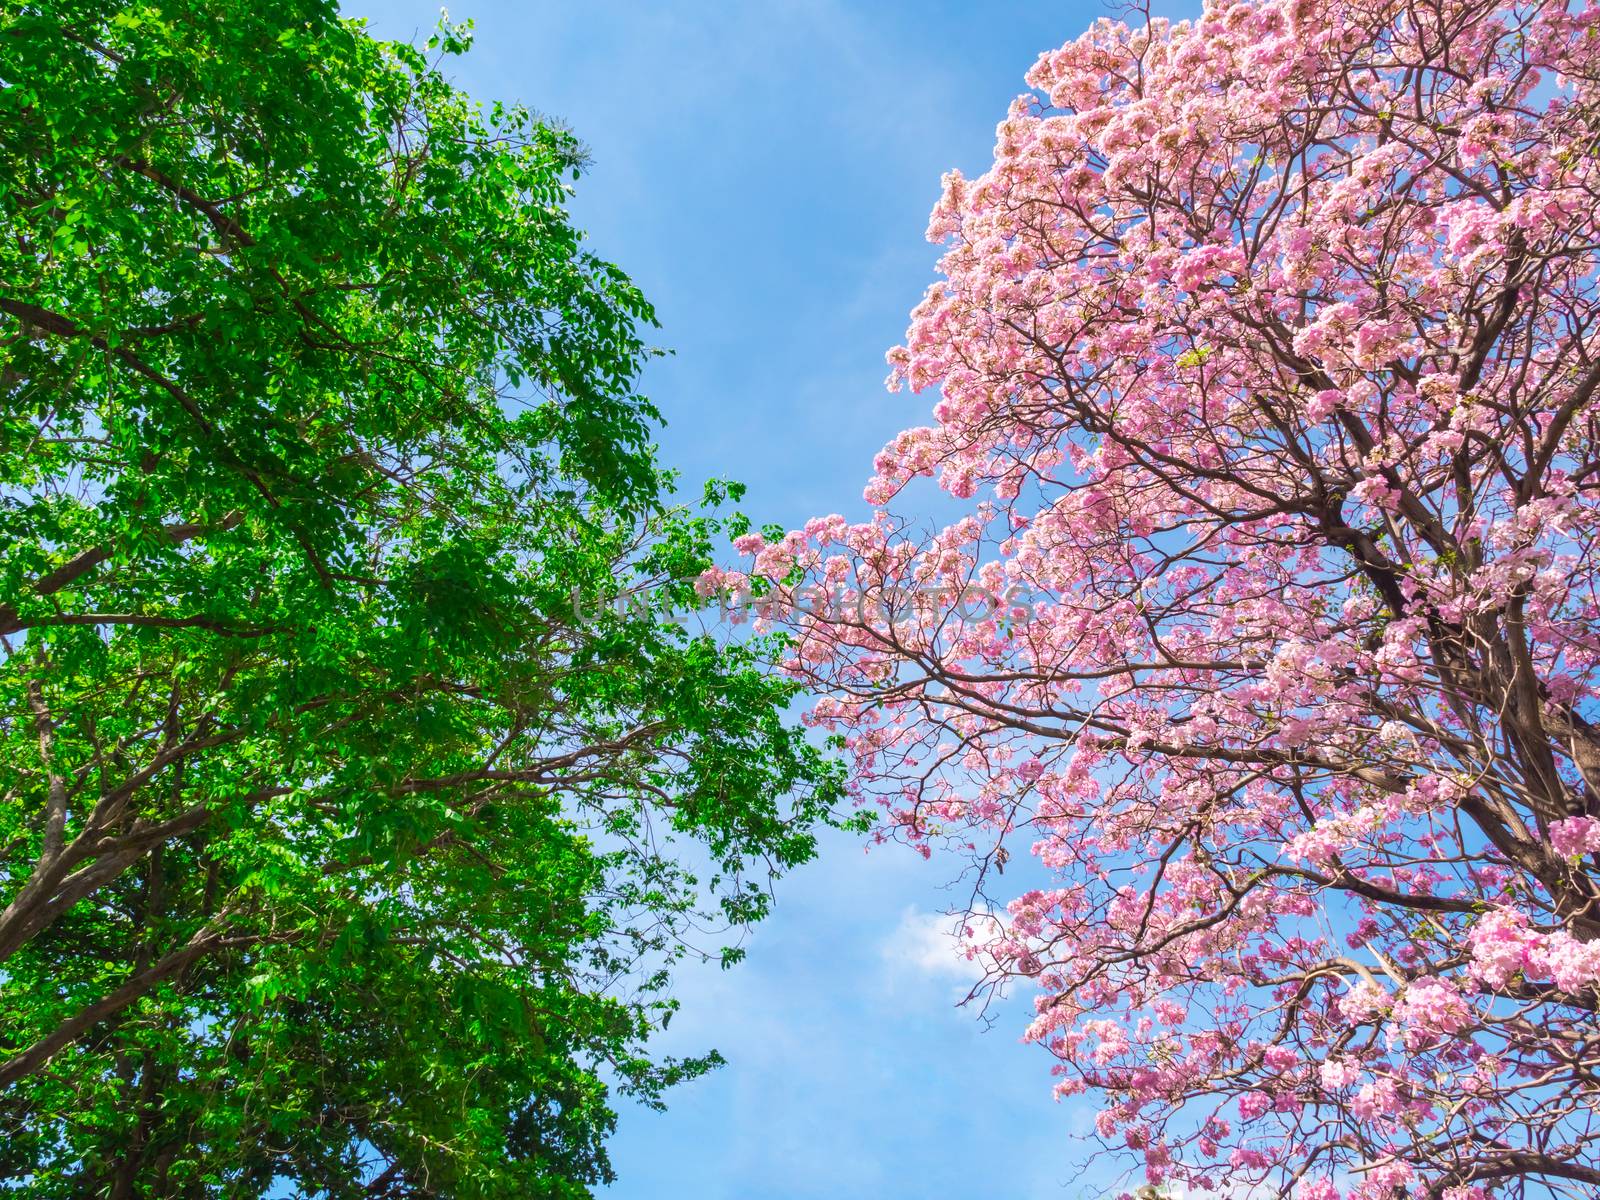 Flowers of pink trumpet tree with green leaves tree on blue sky background by ronnarong